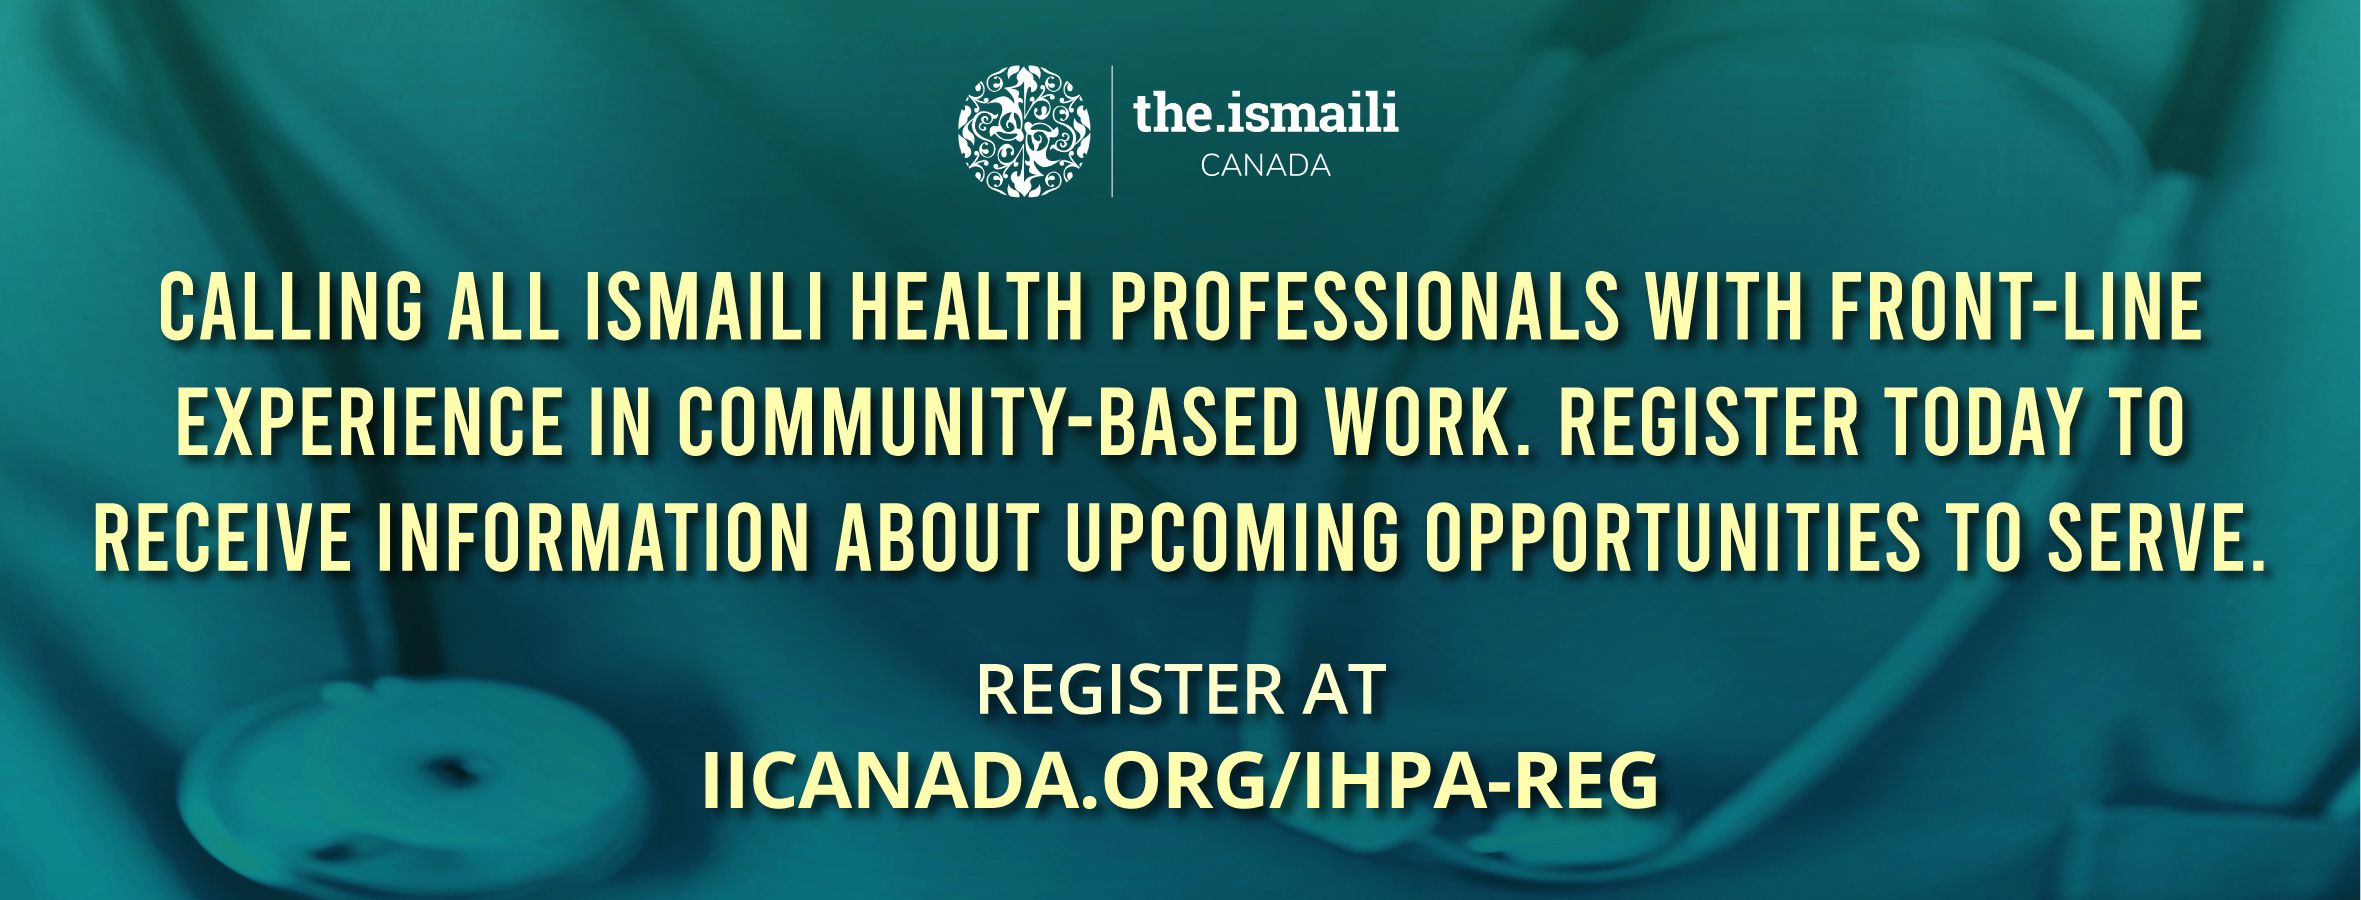 Calling All Ismaili Community-Based Healthcare Workers